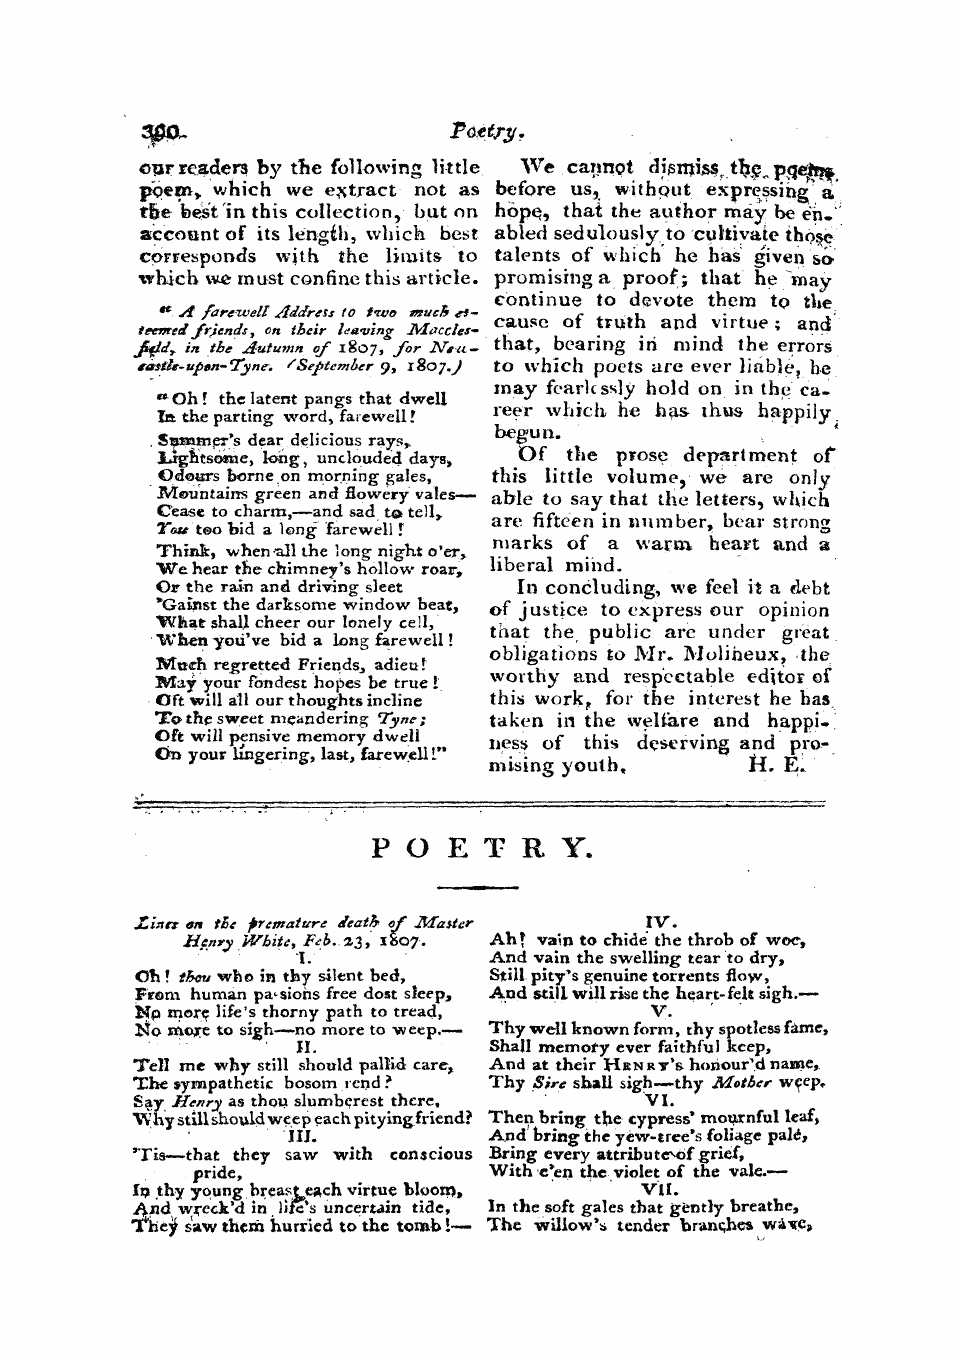 Monthly Repository (1806-1838) and Unitarian Chronicle (1832-1833): F Y, 1st edition: 38